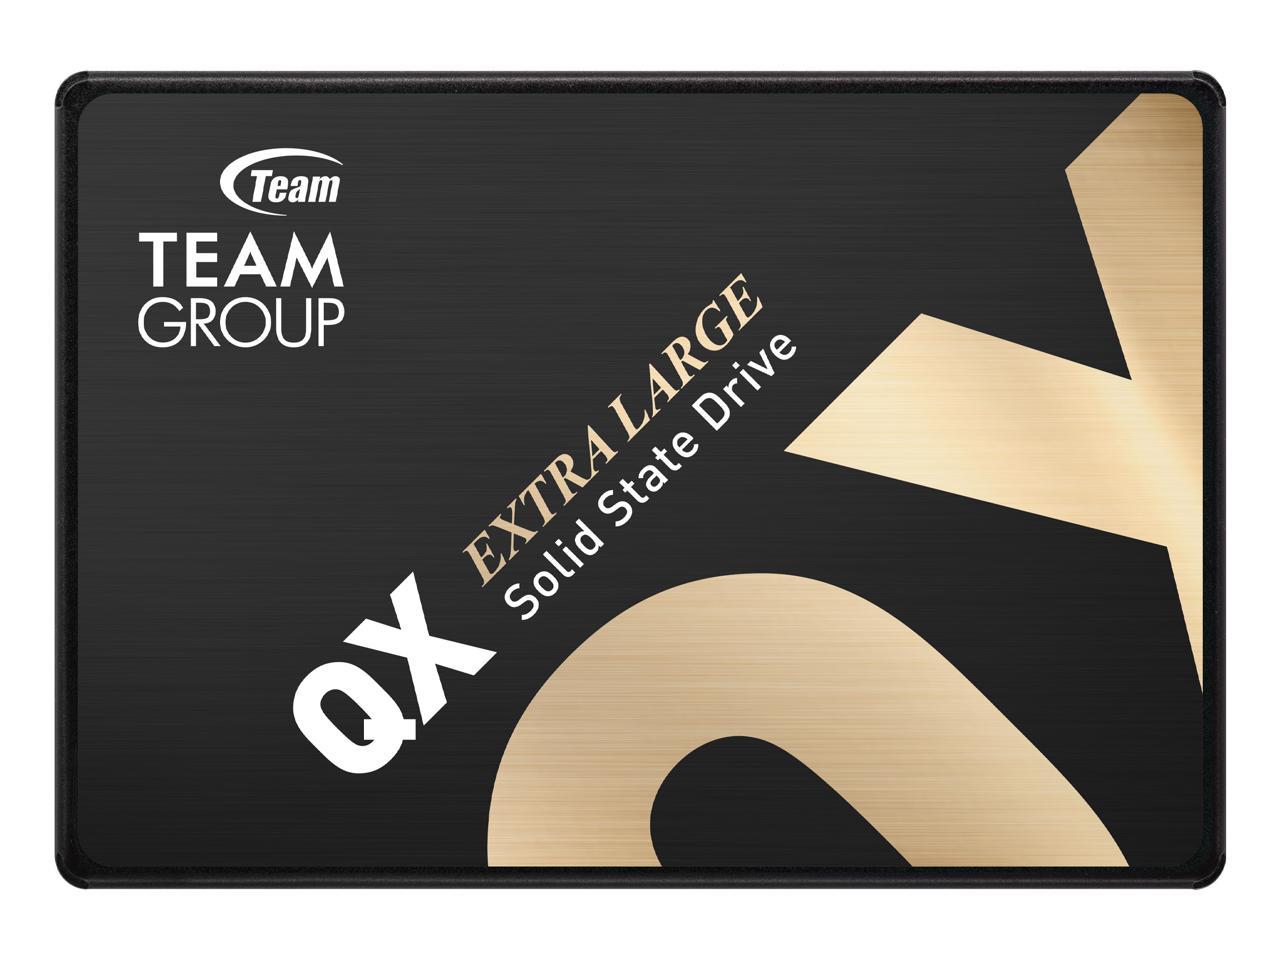 4TB Team Group QX 3D NAND QLC 2.5" SATA III SSD (T253X7004T0C101) + Rosewill SATA III Cable $140 + Free Shipping